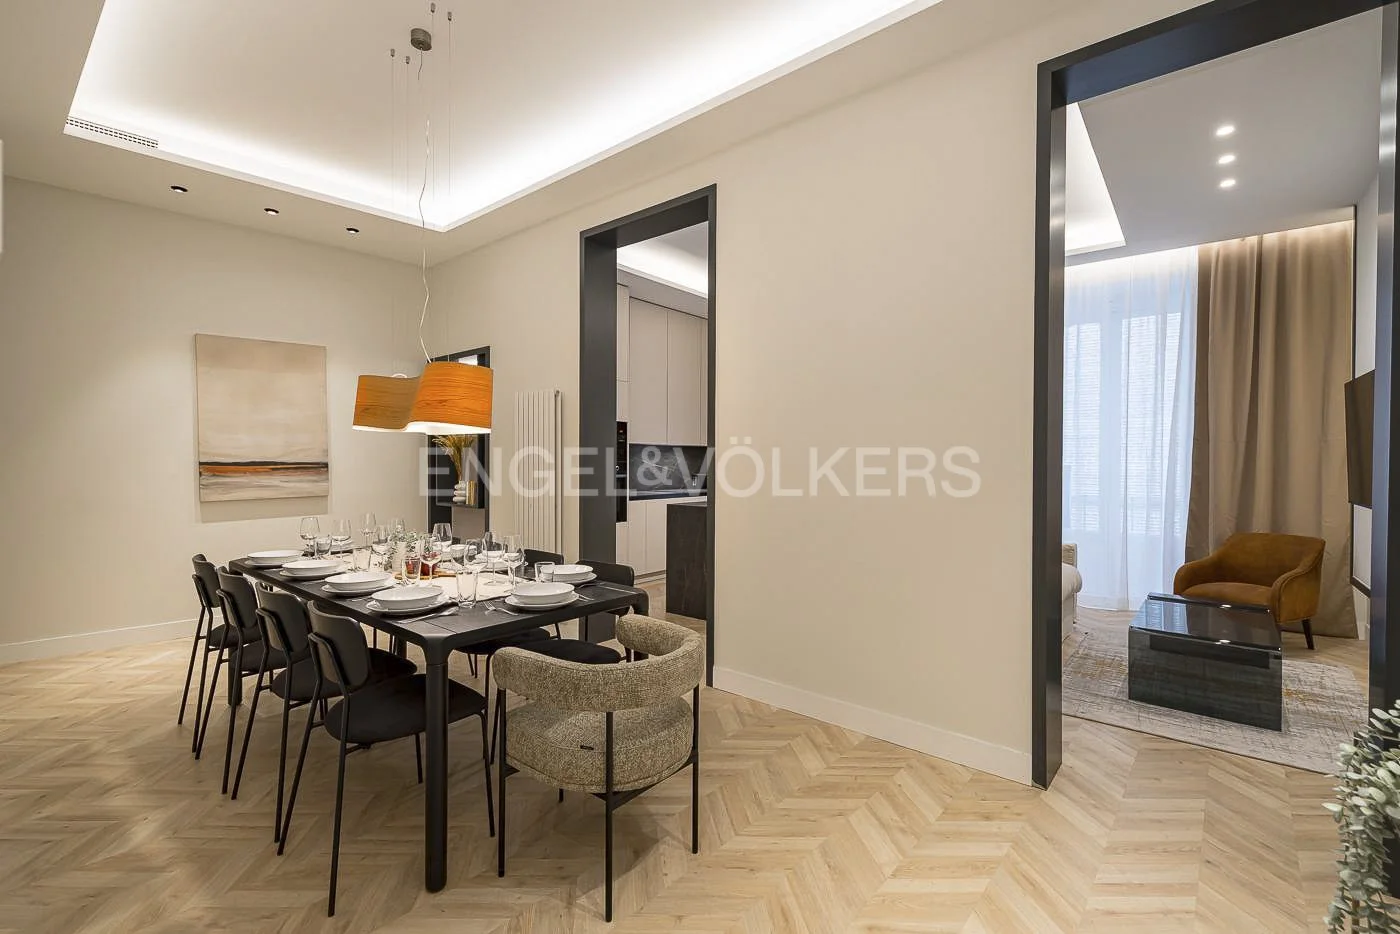 Brand new exterior apartment with 2 balconies in Malasaña